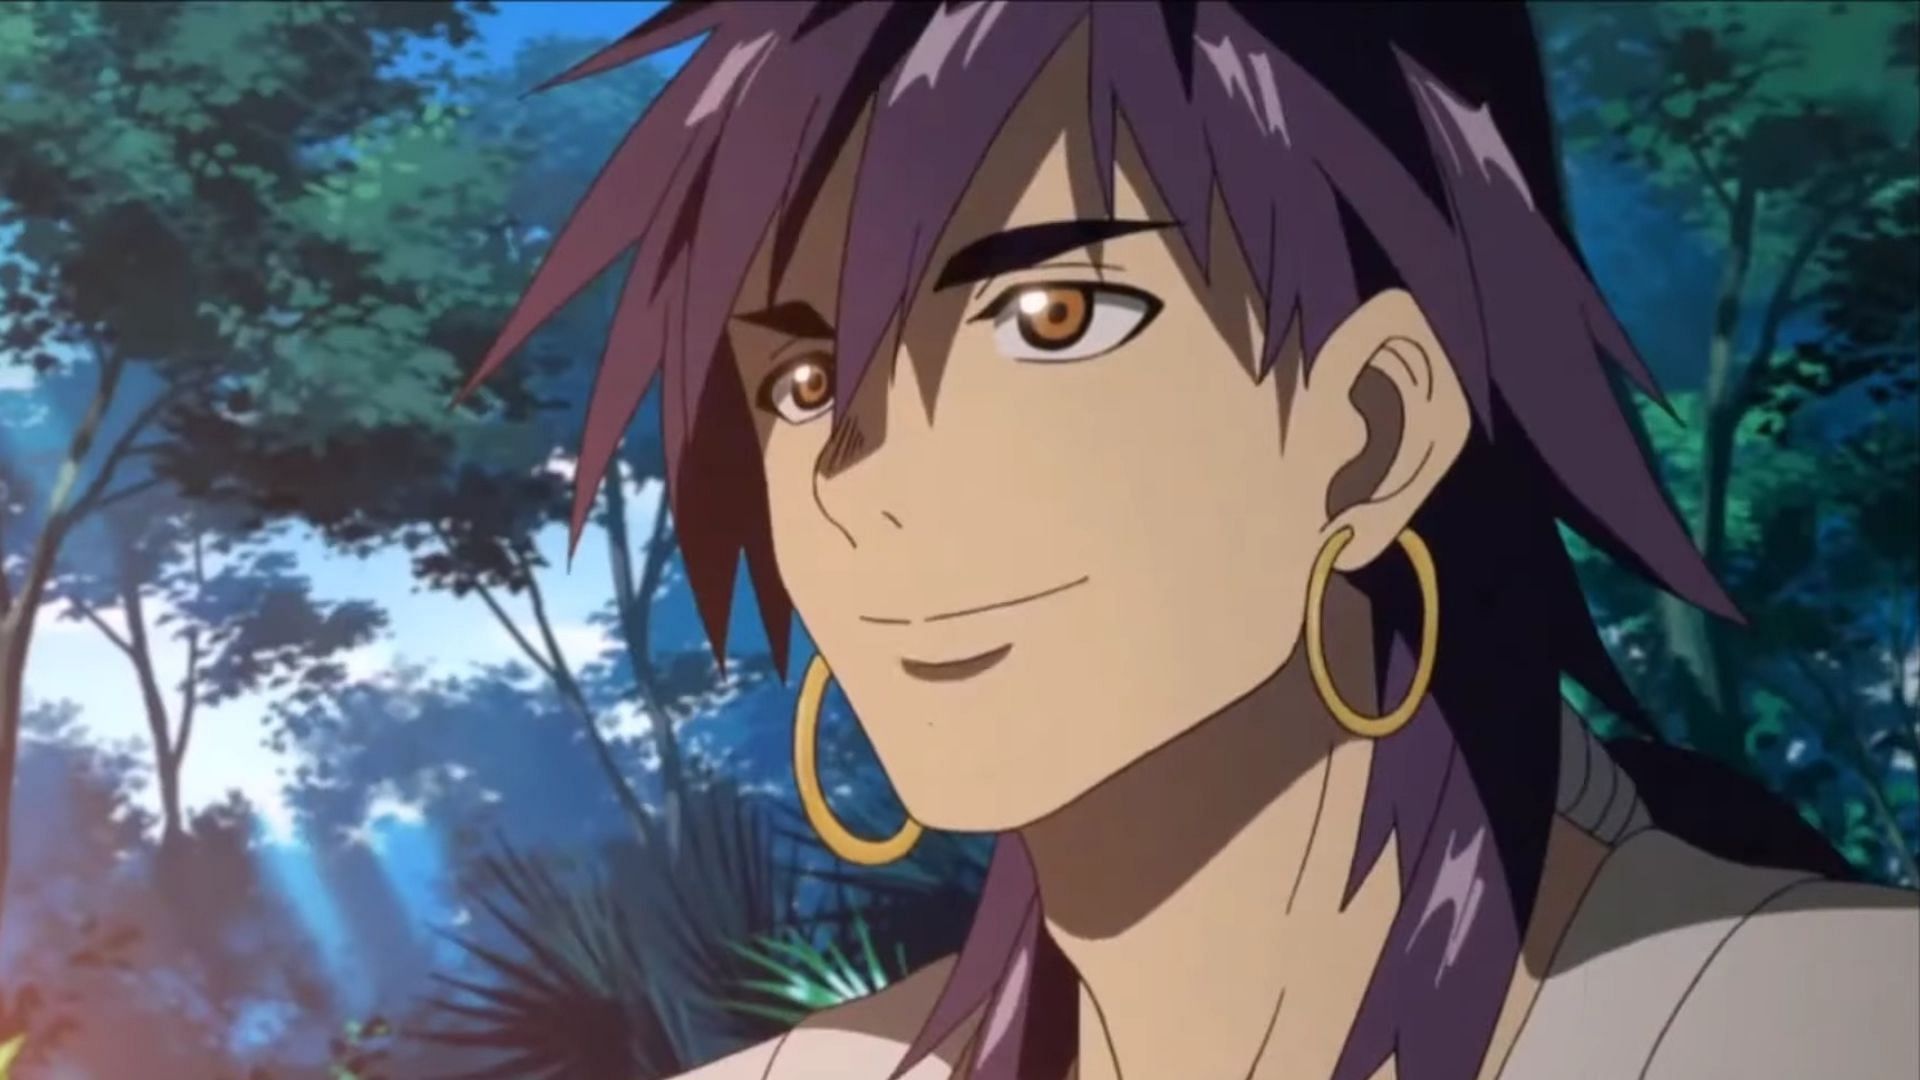 Ten Years Later Will There Ever Be a Magi Season 3